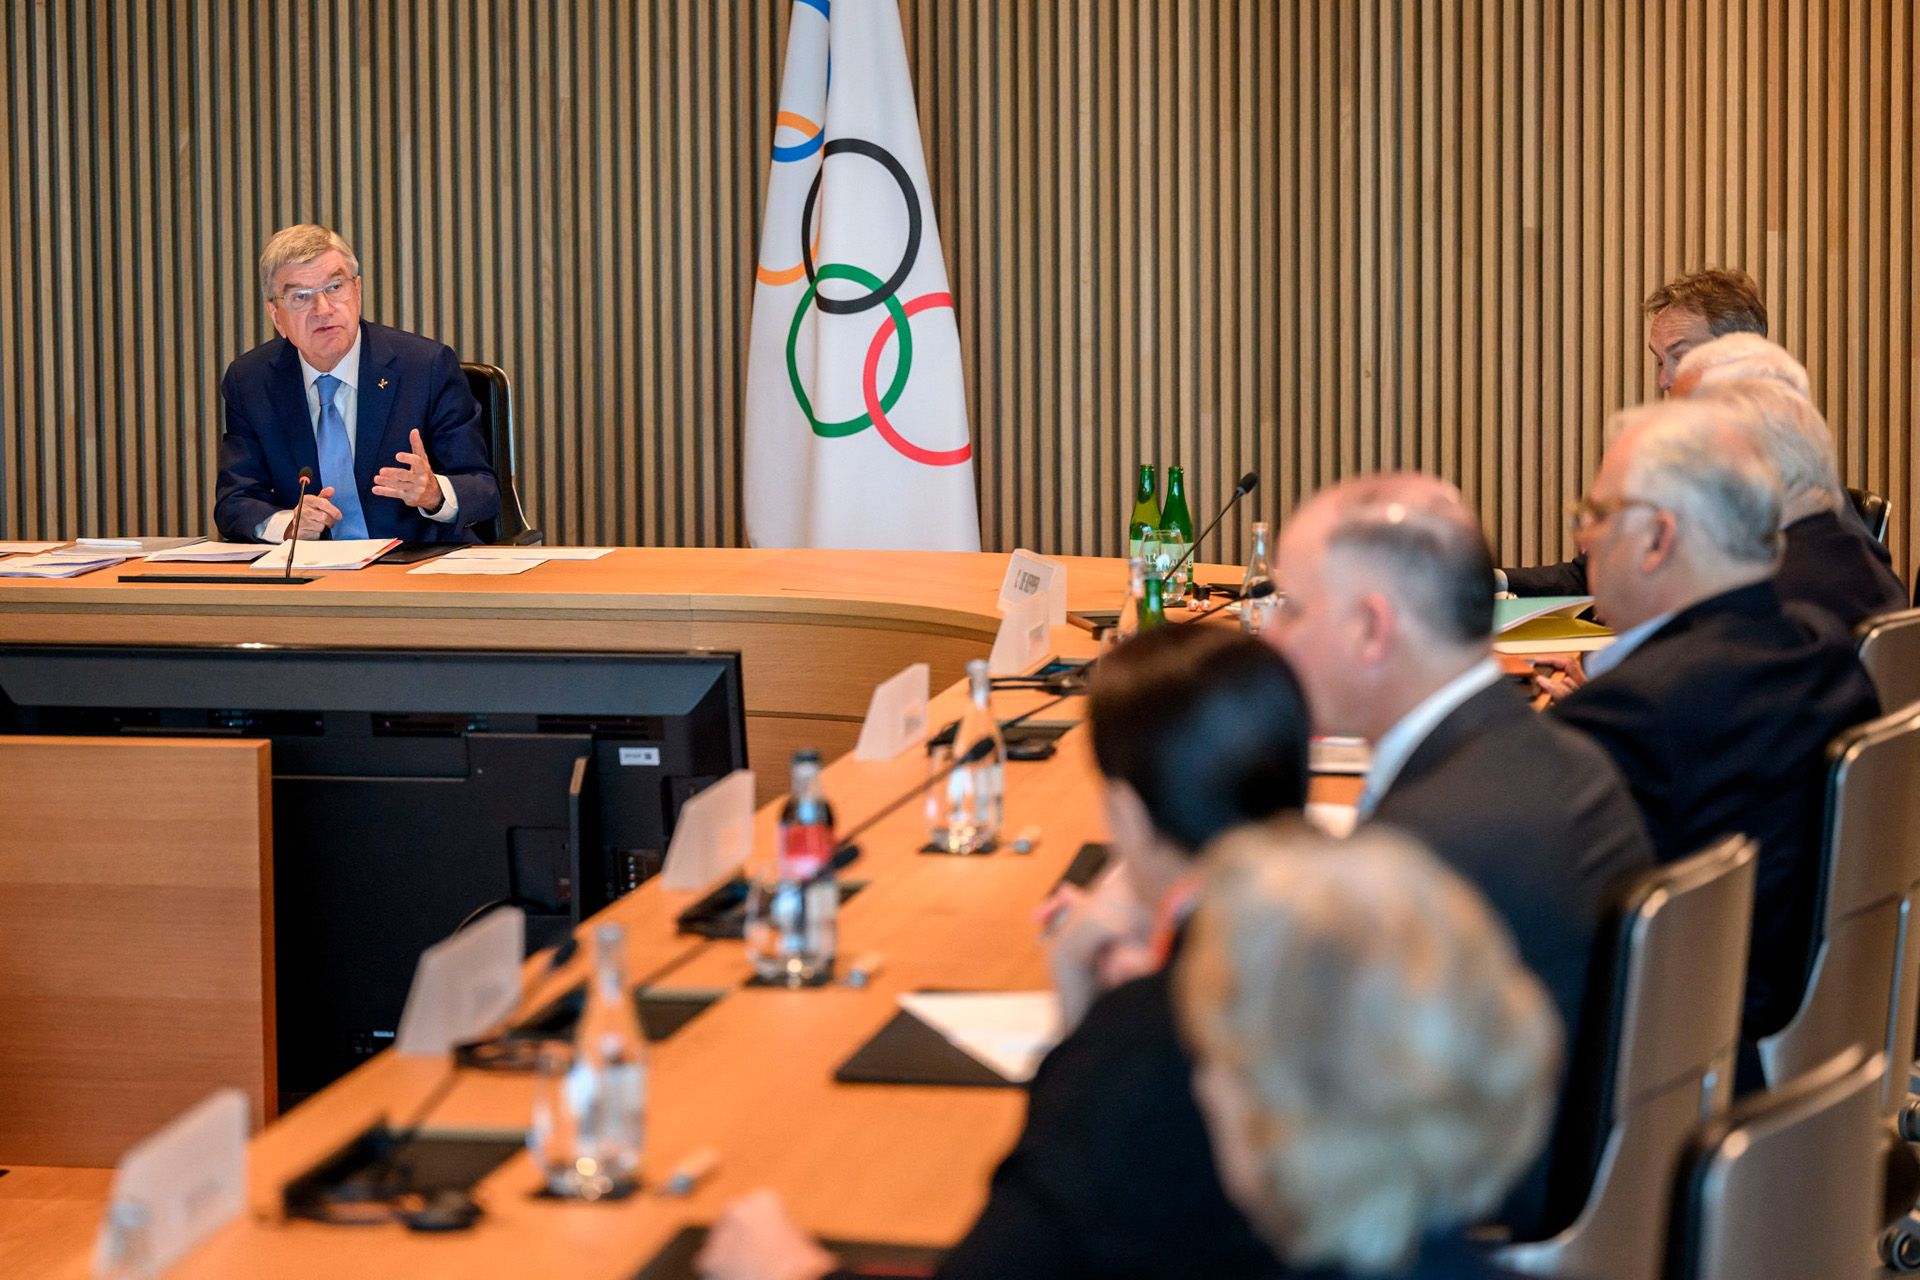 The IOC opened the doors to Russians and Belarusians and received criticism from both sides